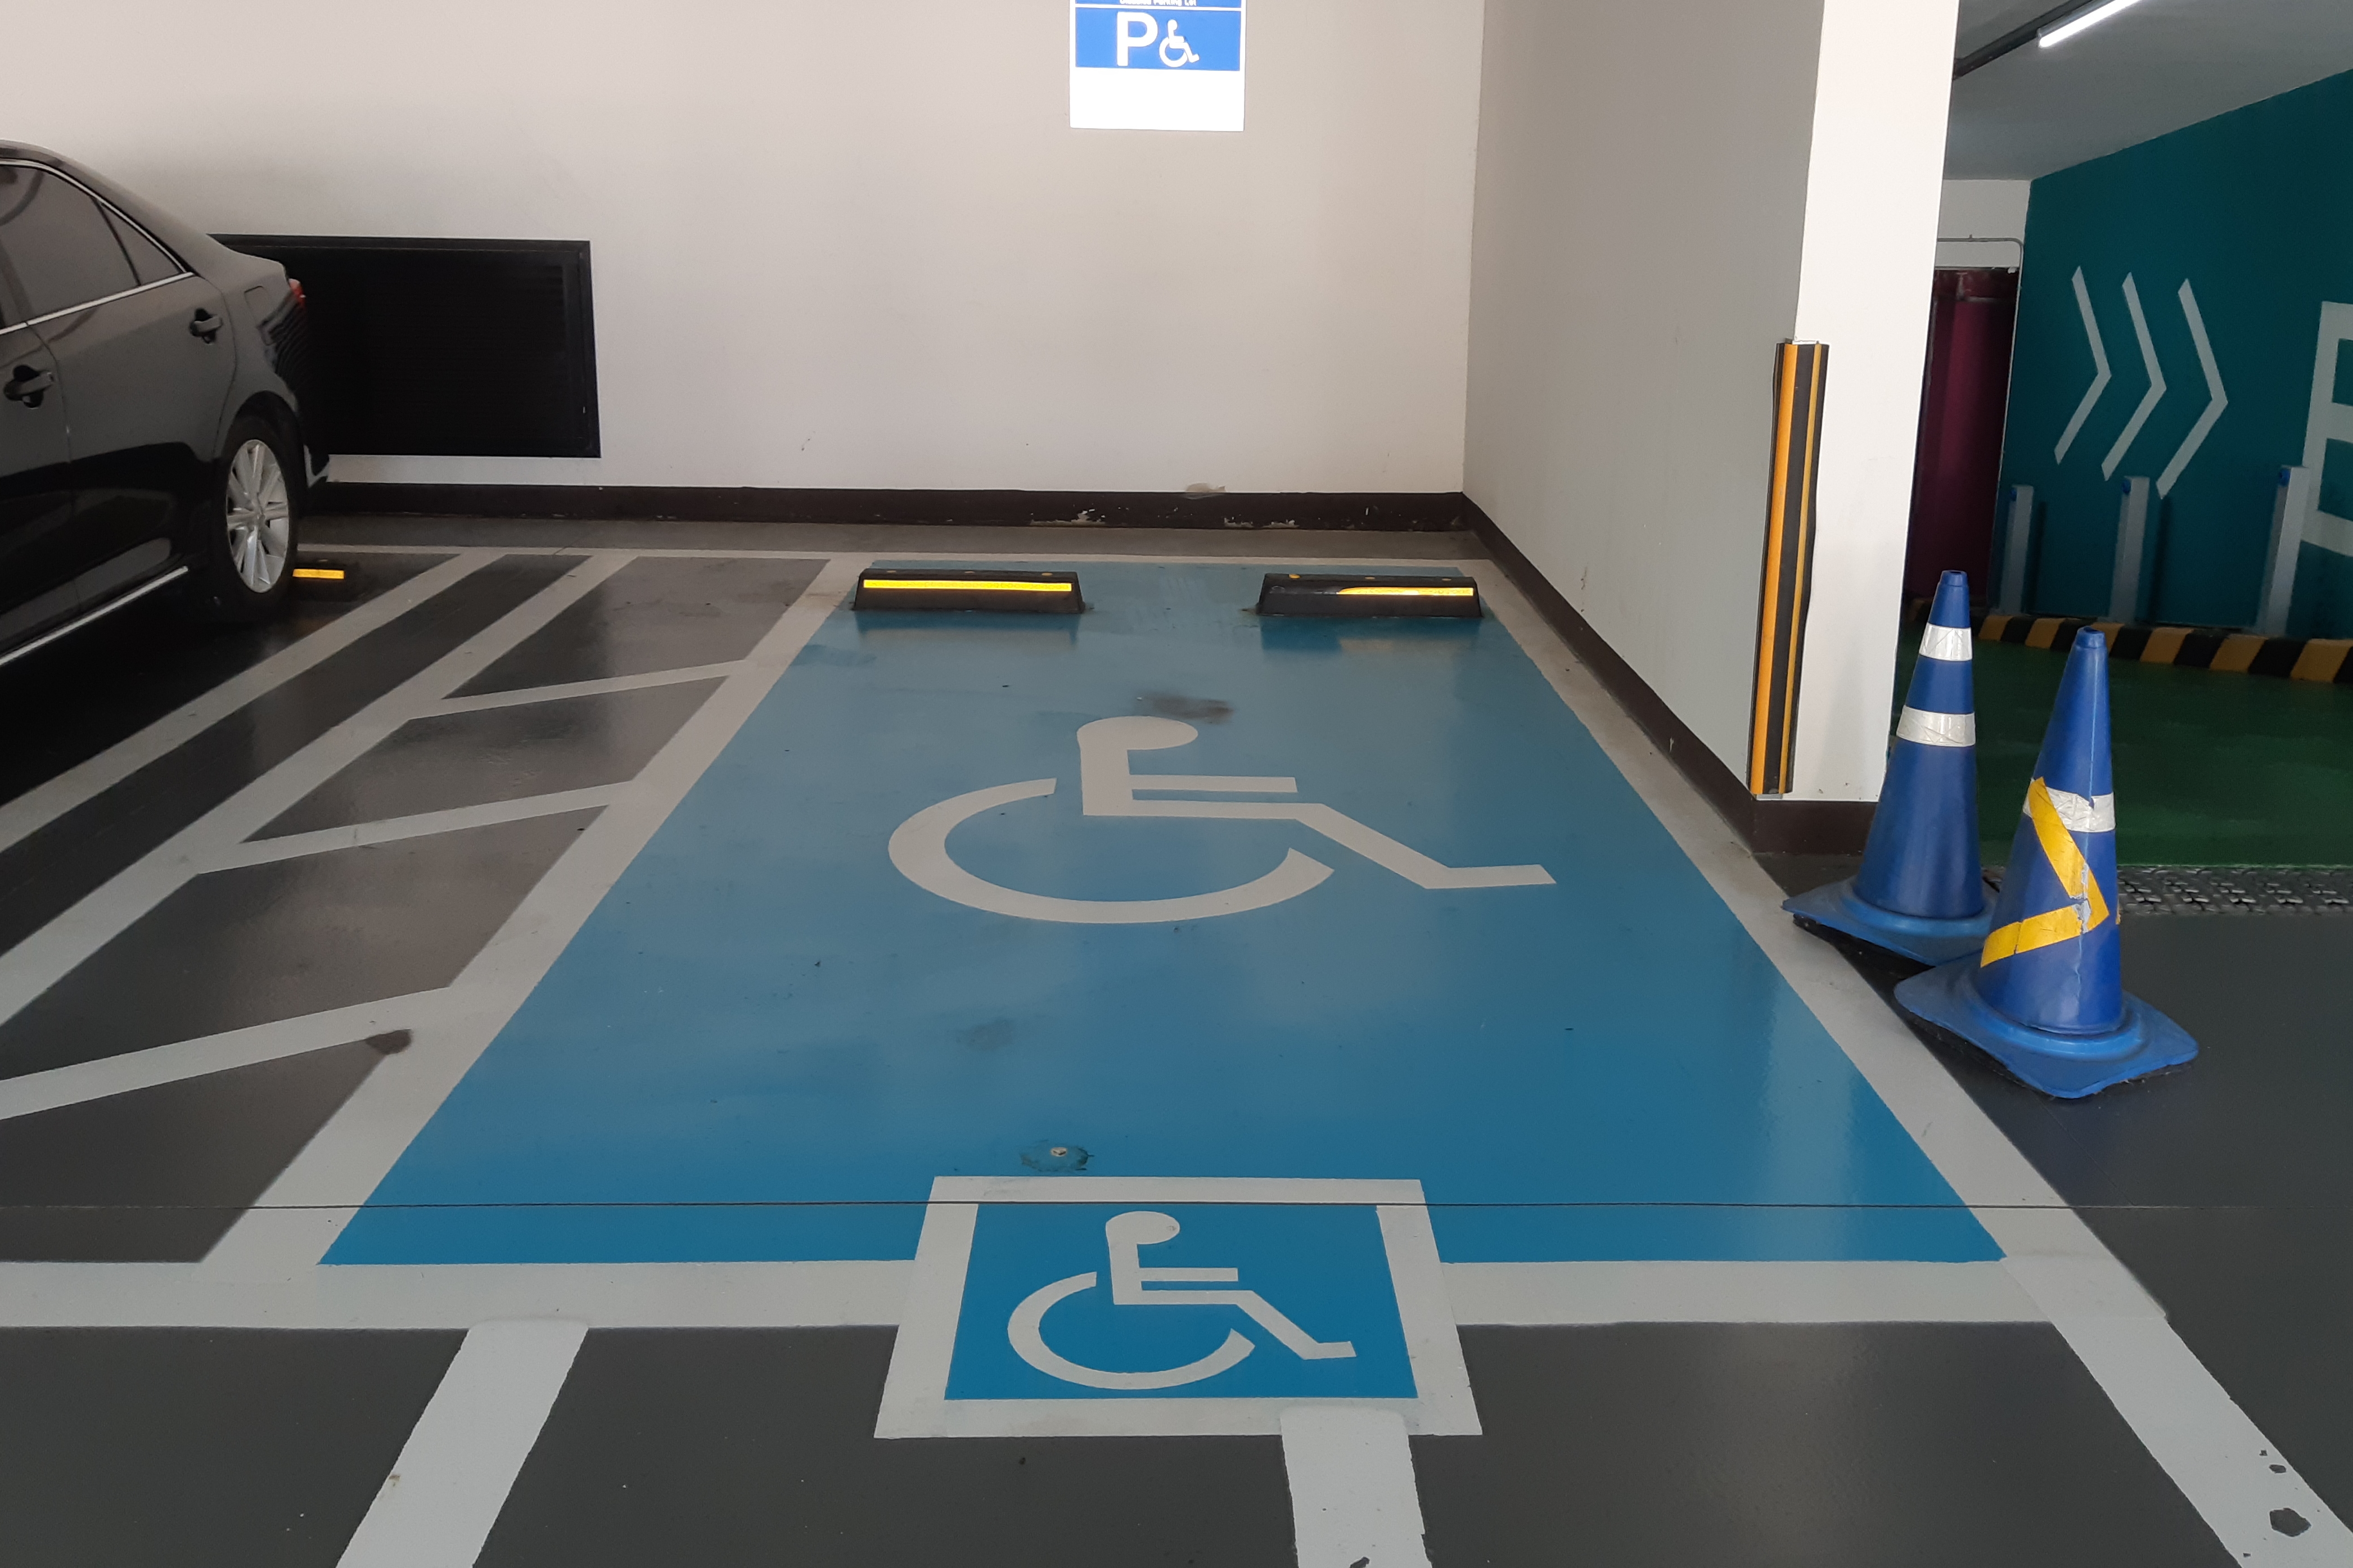 Parking facilities for persons with disabilities Children resting area0 : Parking facilities for persons with disabilities on basement floor